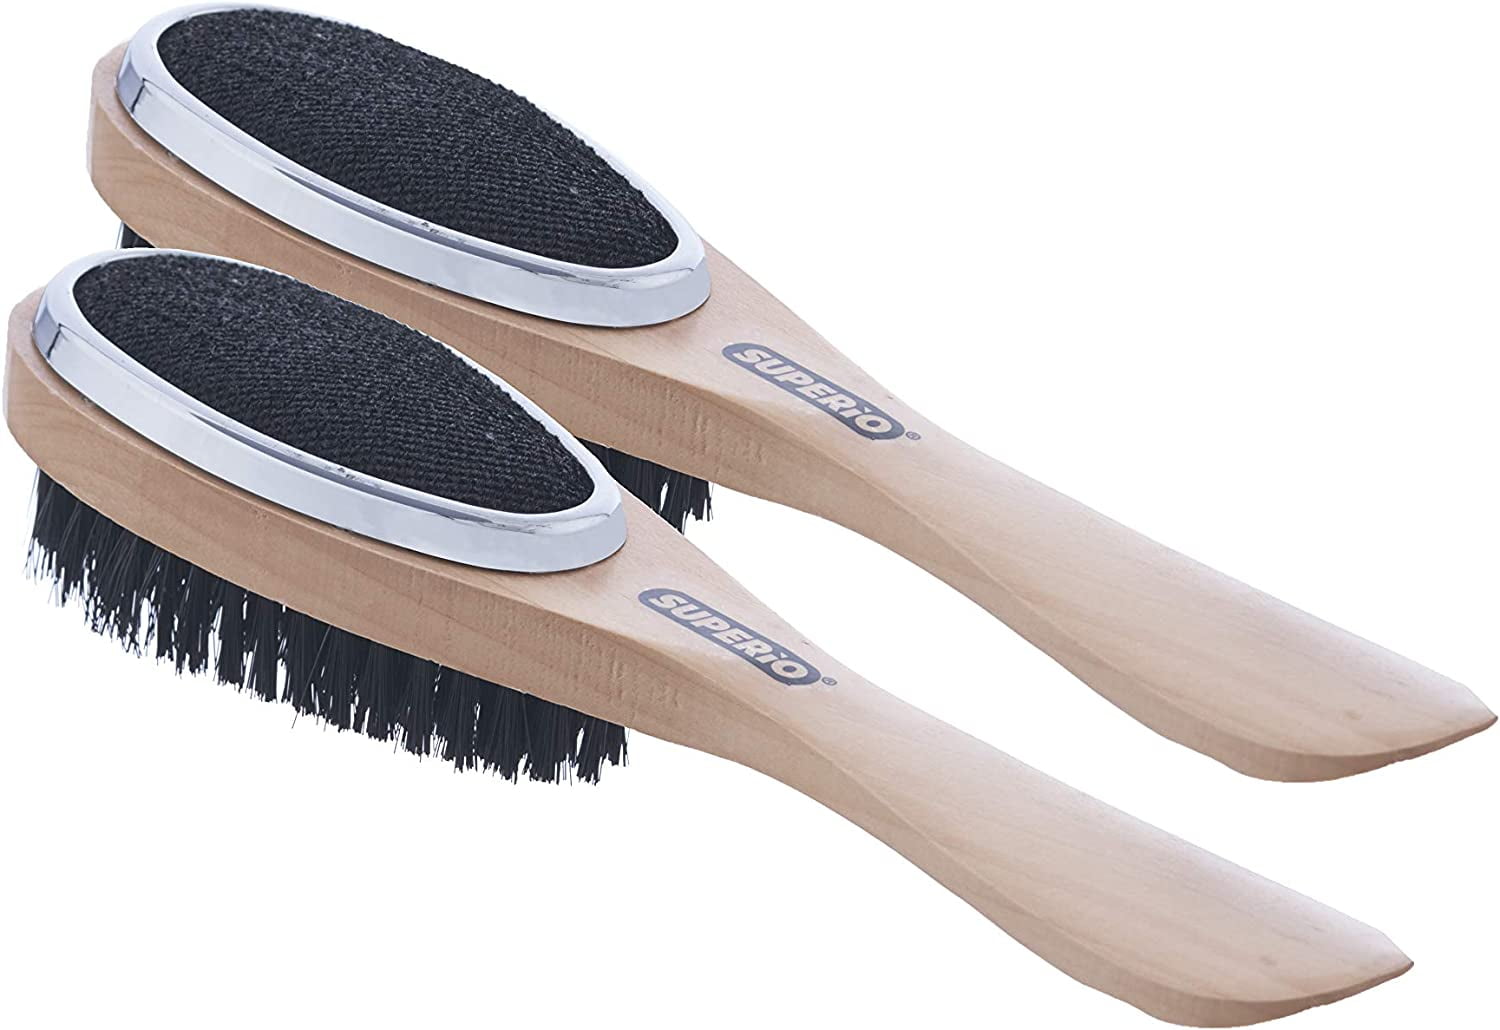 Wooden Clothes Brush With Soft Fiber Wool, Durable Scrubbing Hand Brush  Household Cleaning Tool For Washing Clothes Shoes Floor